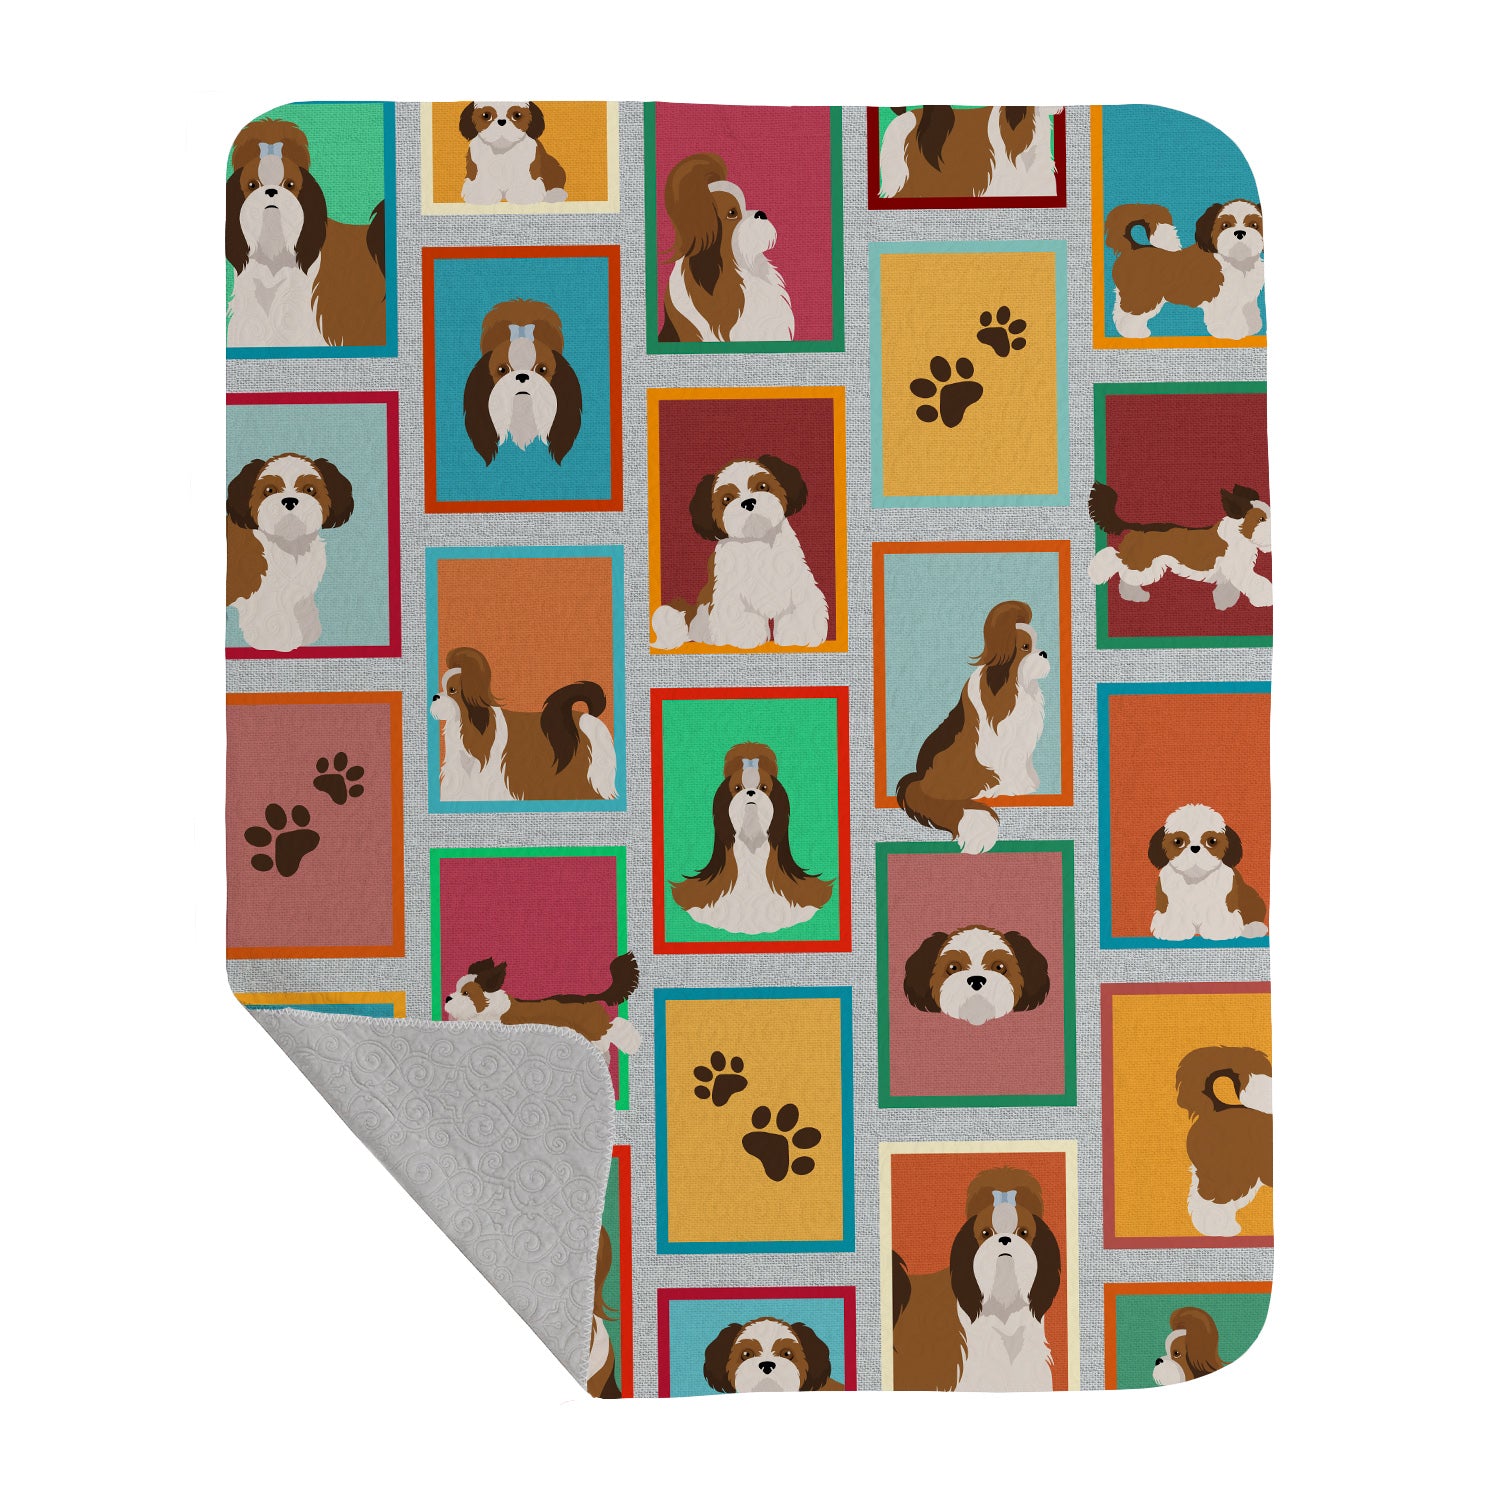 Buy this Lots of Shih Tzu Quilted Blanket 50x60